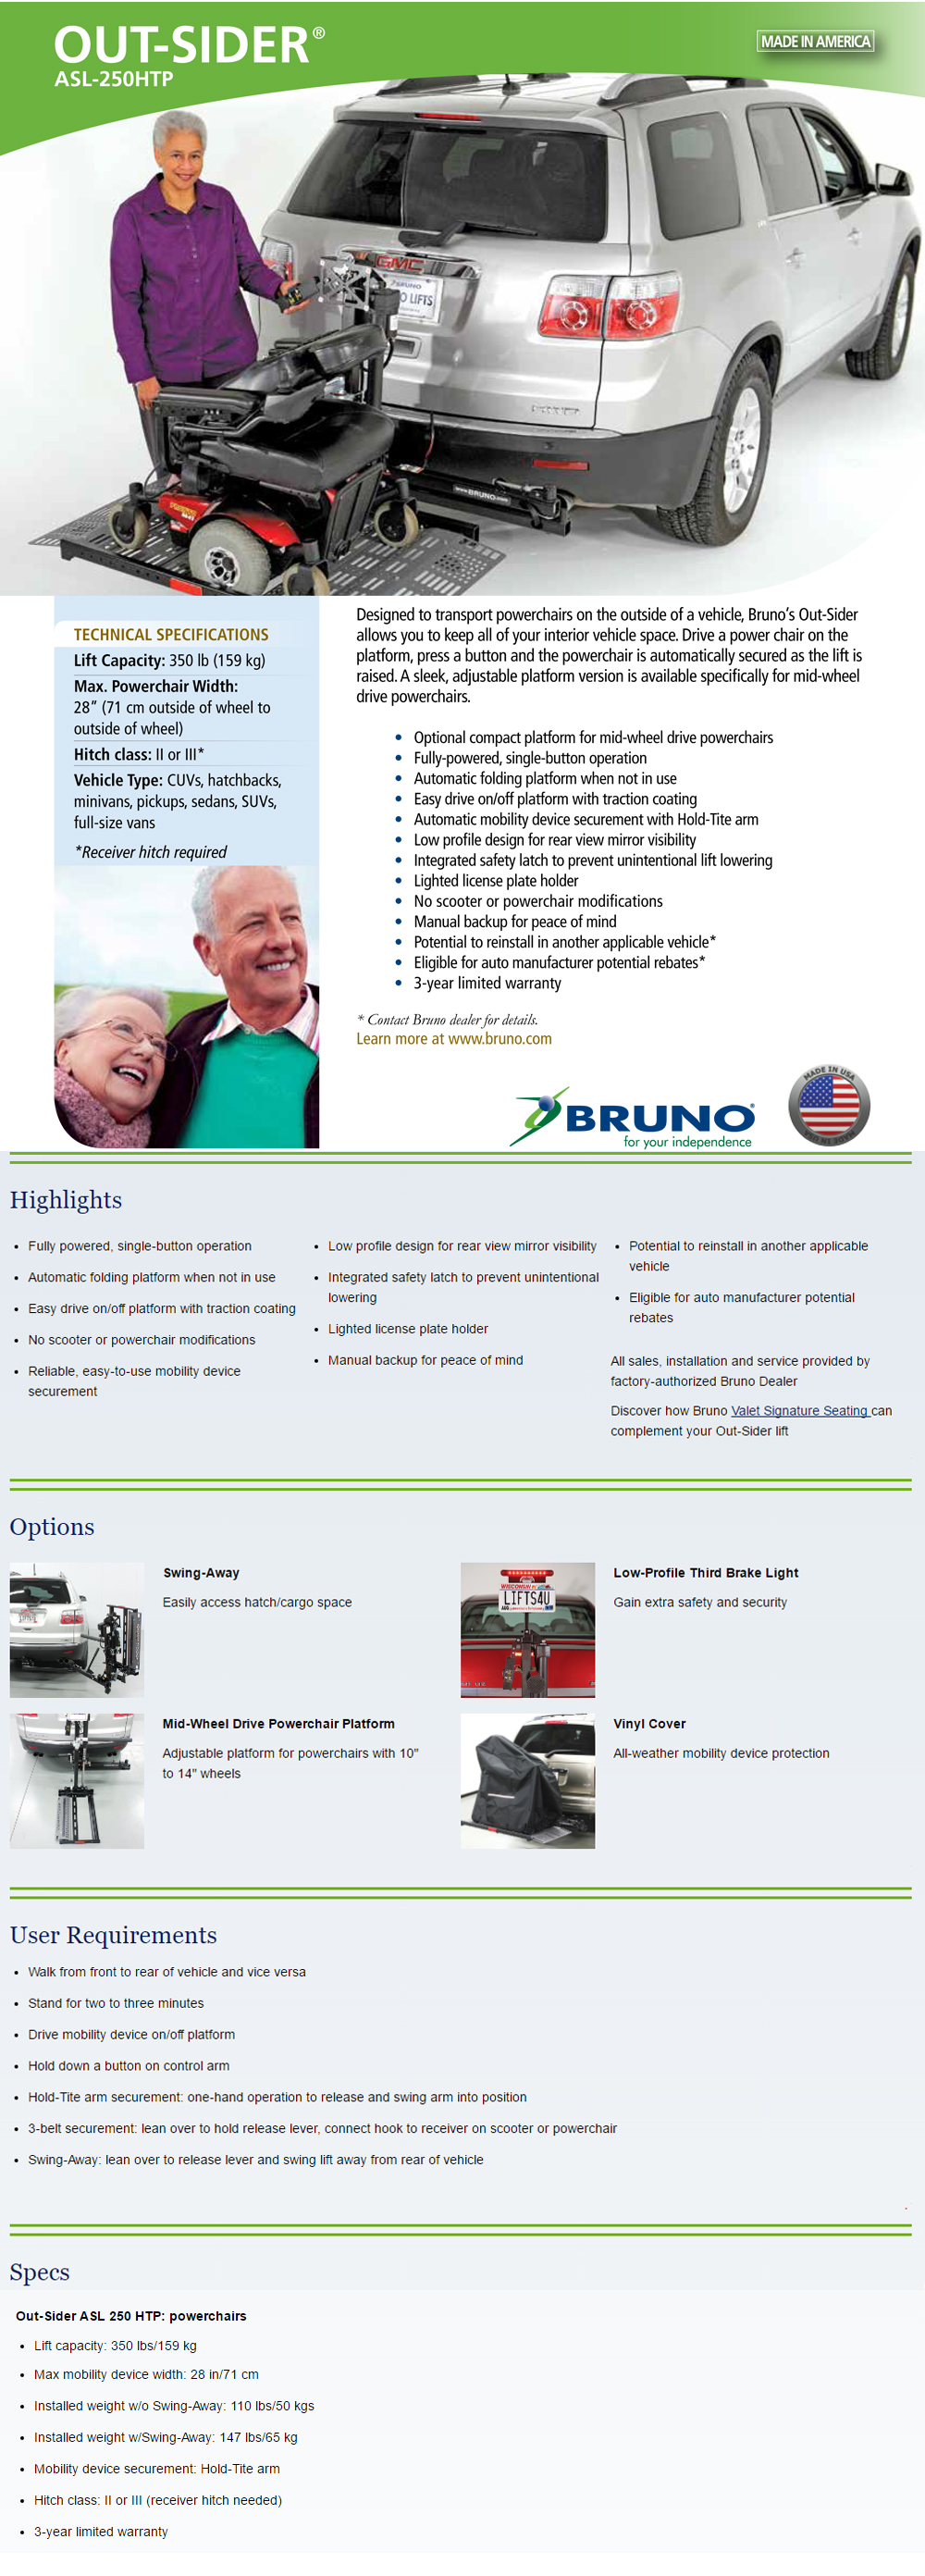 Bruno-ASL250HTP-Outsider-powerchair-electric-lift